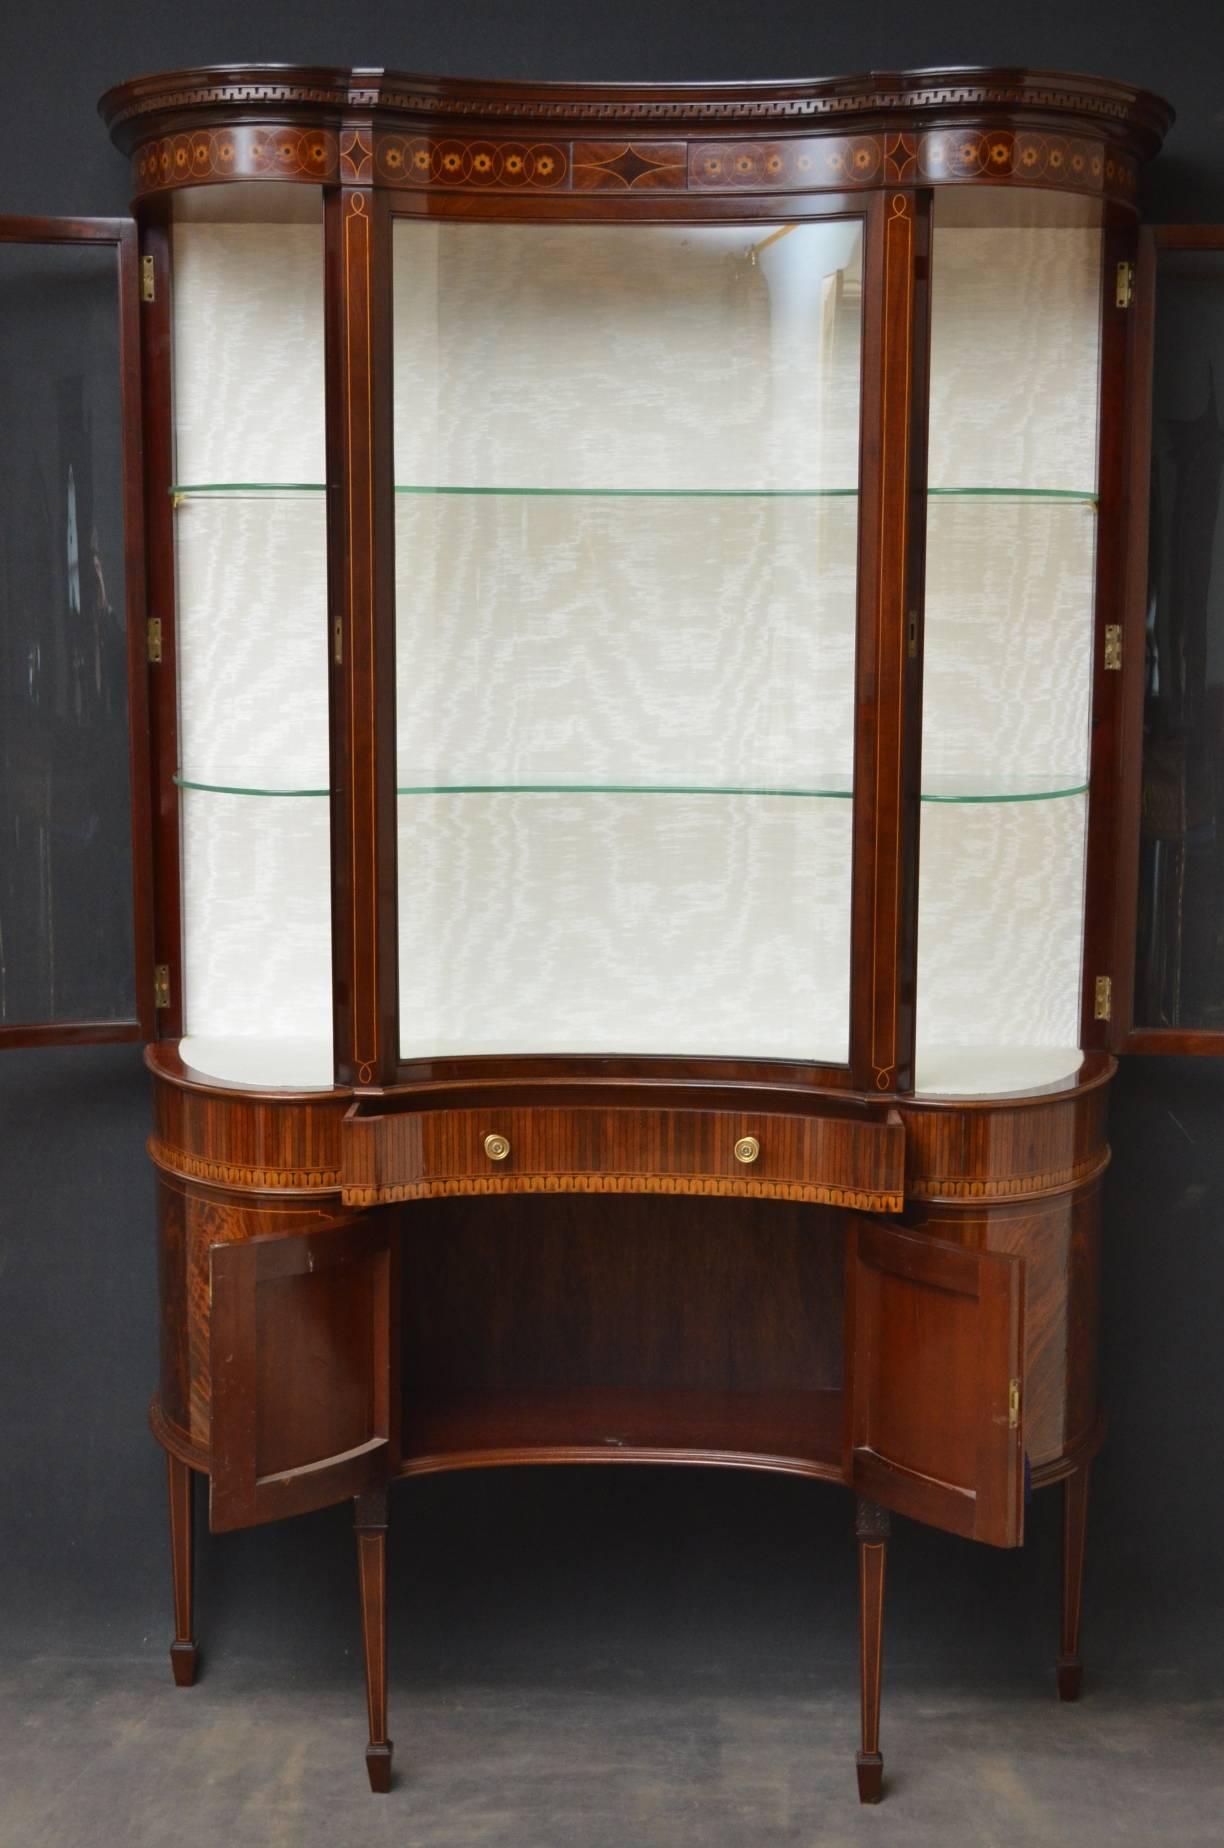 Sn4121 exceptional late Victorian / Edwardian mahogany and inlaid display cabinet of serpentine design, having moulded cornice with Greek key carving above finely inlaid frieze, concave centre panel flanked by satinwood string inlaid pilasters and